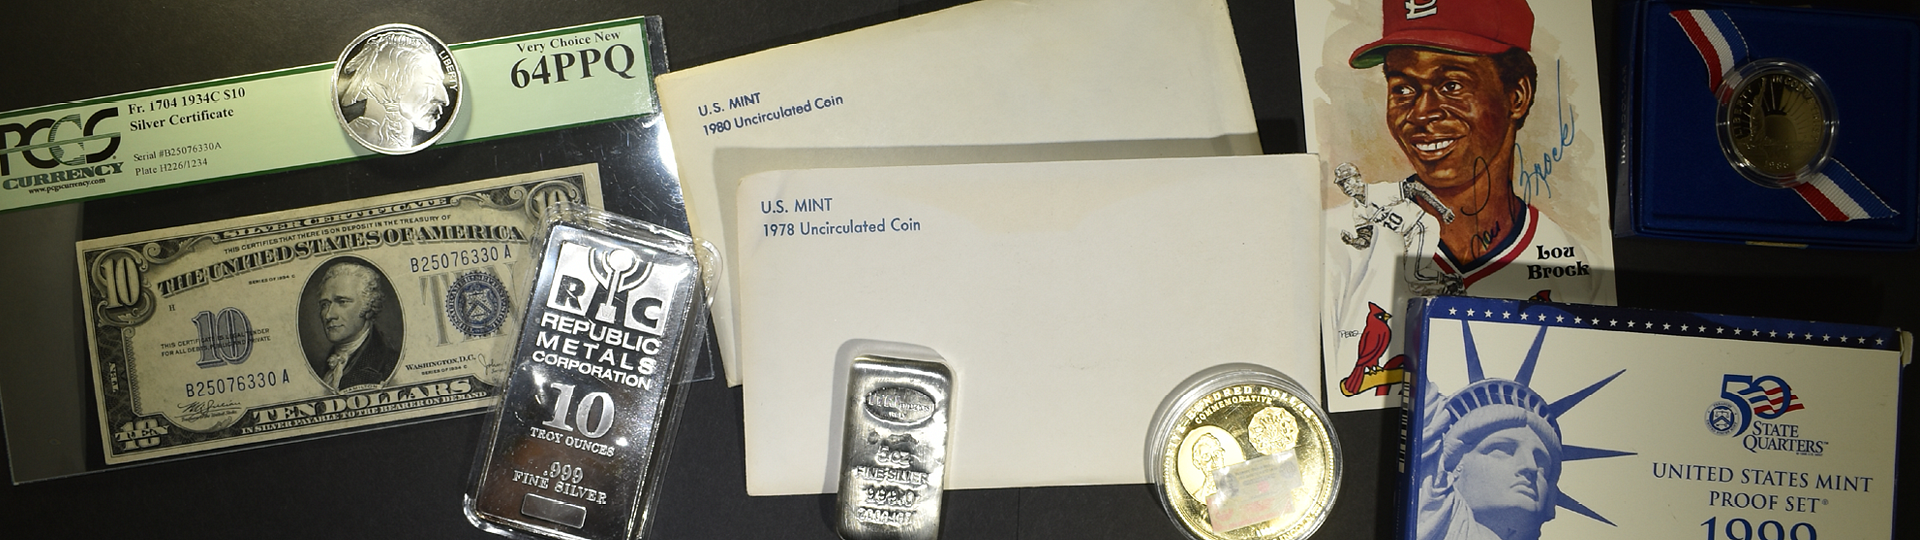 March 28th Silver City Rare Coins & Currency by Silver City Auctions